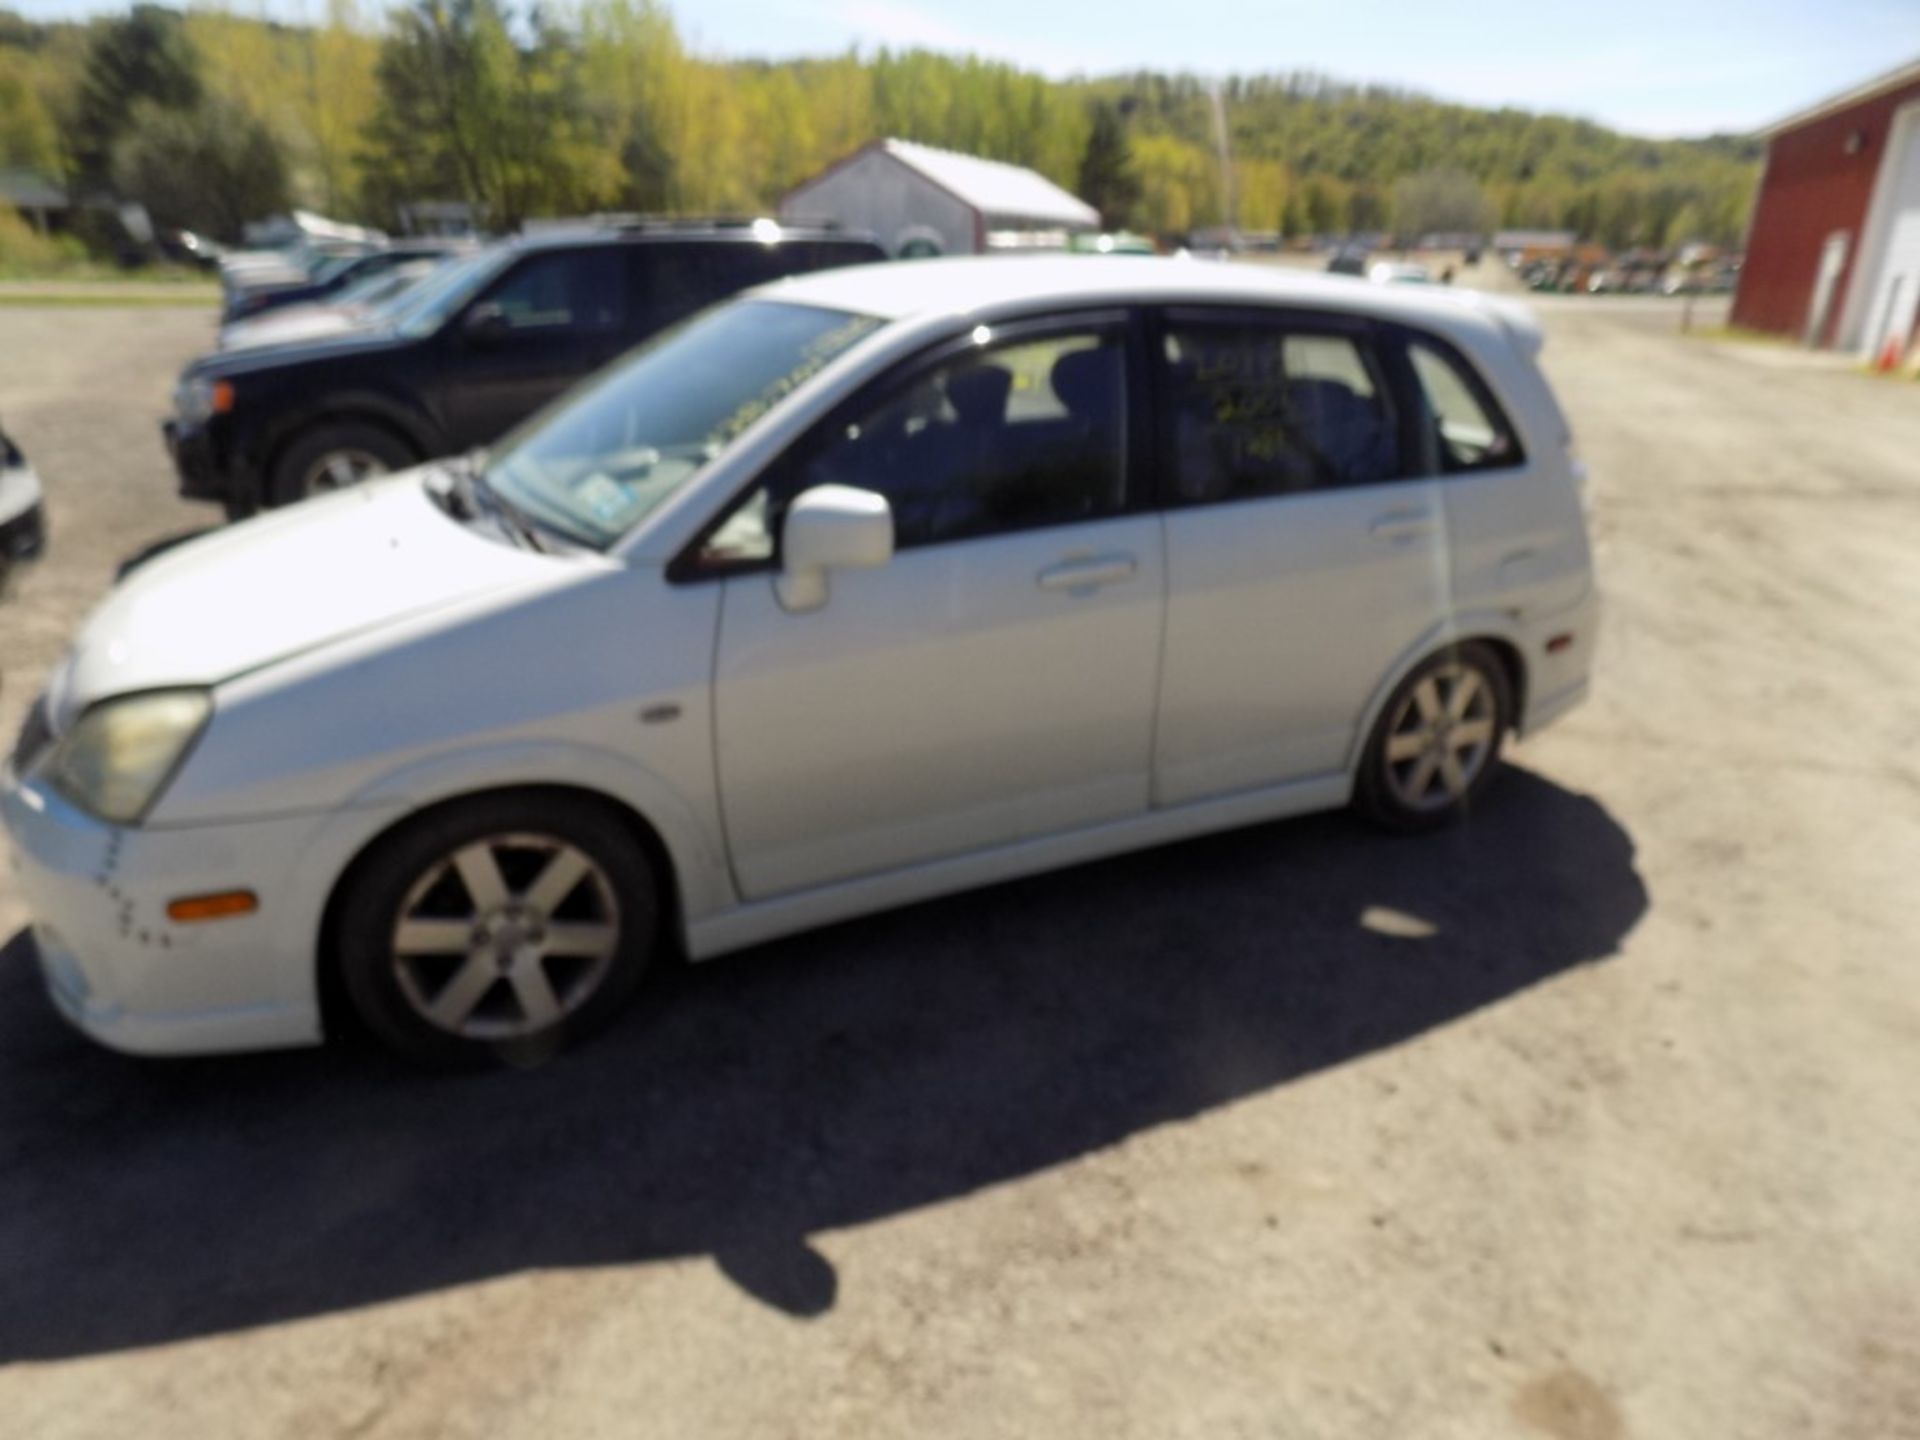 2006 Suzuki Aerio AWD Wagon, 128,701 Miles, Vin # JS2RD61HX65350207 - OPEN TO ALL BUYERS, AIR BAG - Image 2 of 4